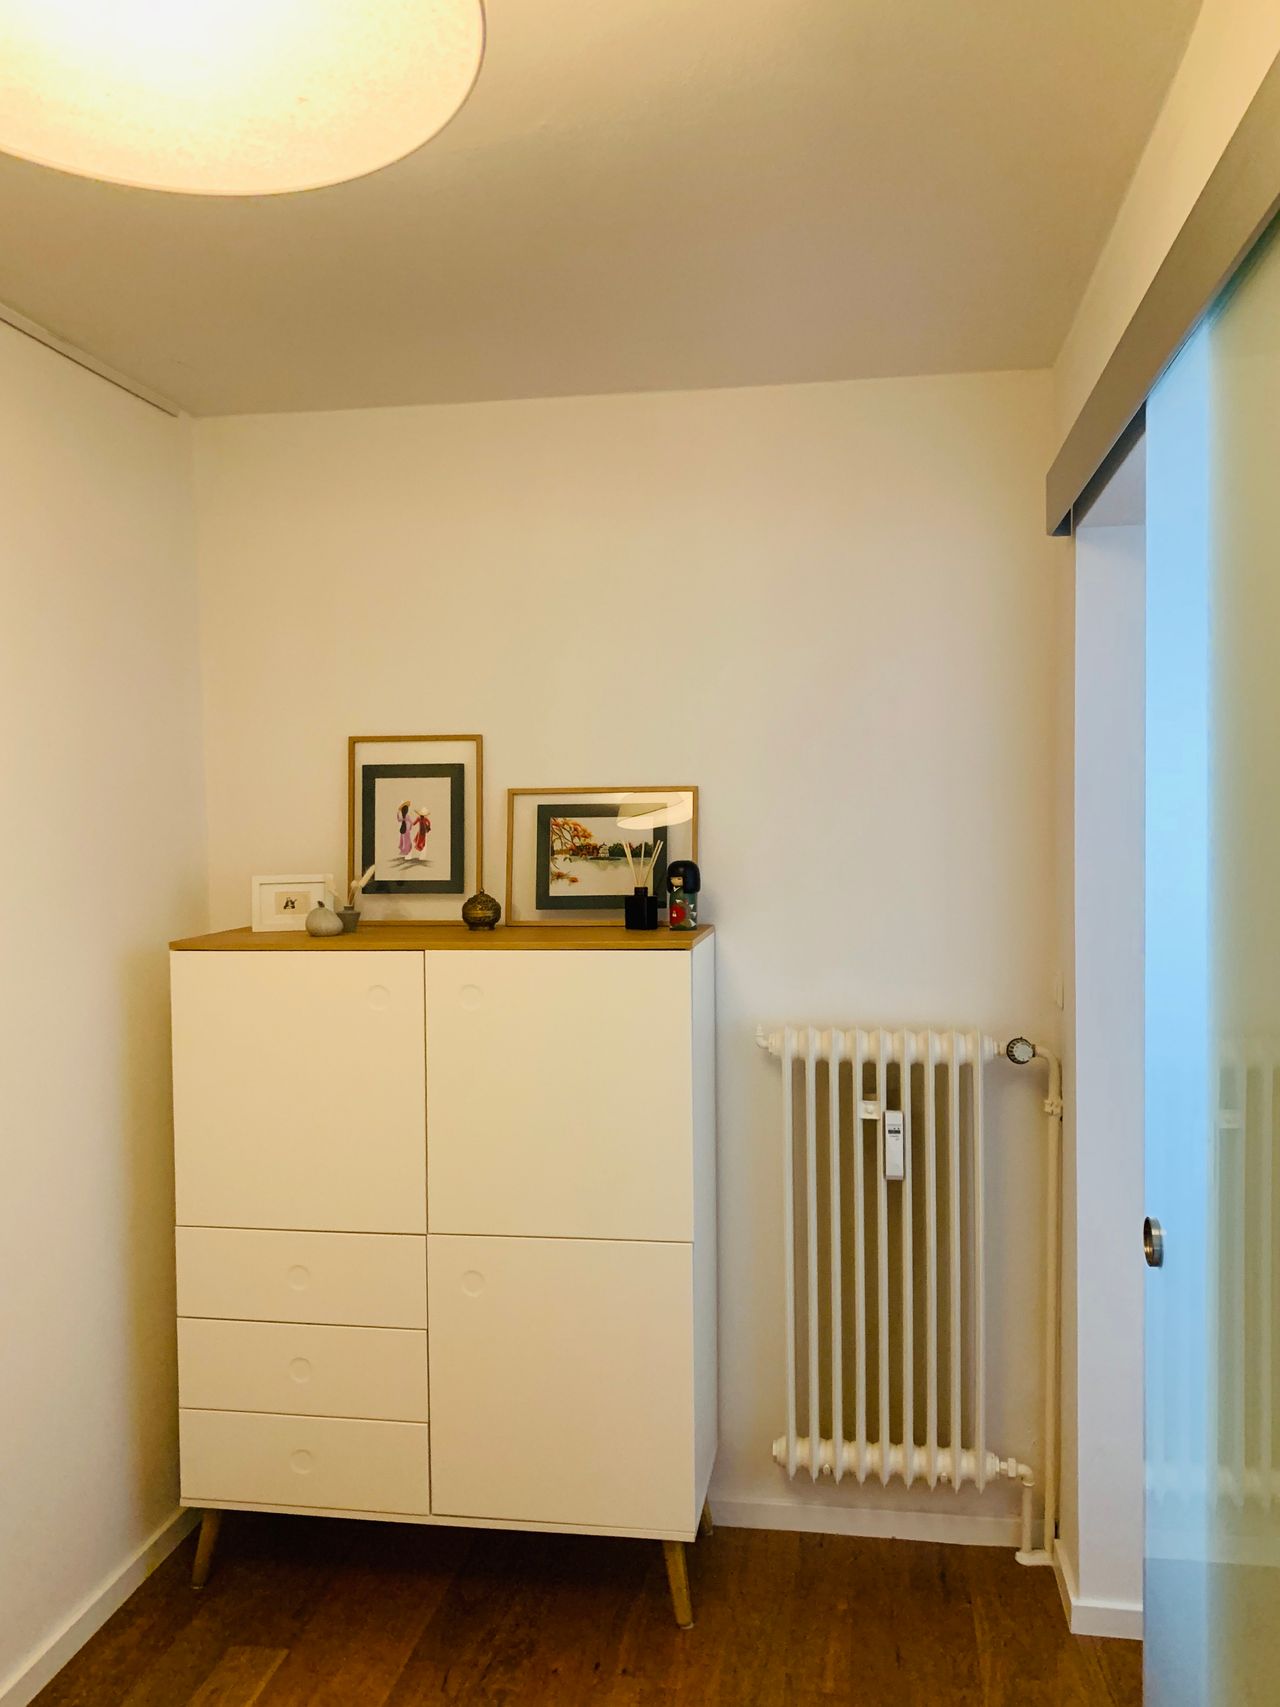 In the heart of Altstadt-Lehel: Modern and furnished city apartment